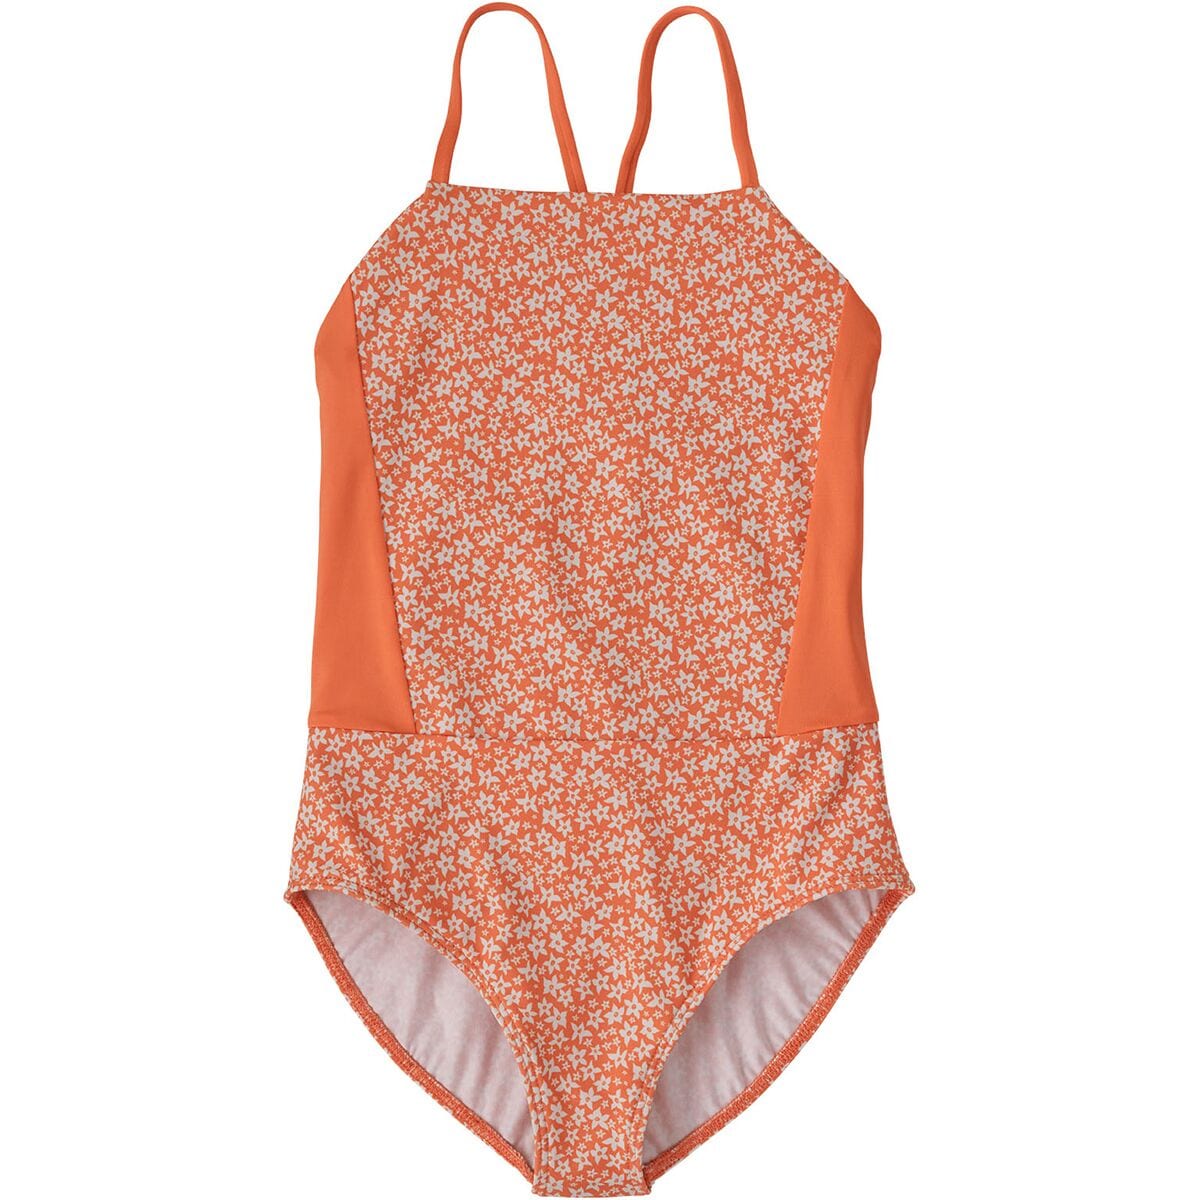 Patagonia Shell Seeker One-Piece Swimsuit - Girls'